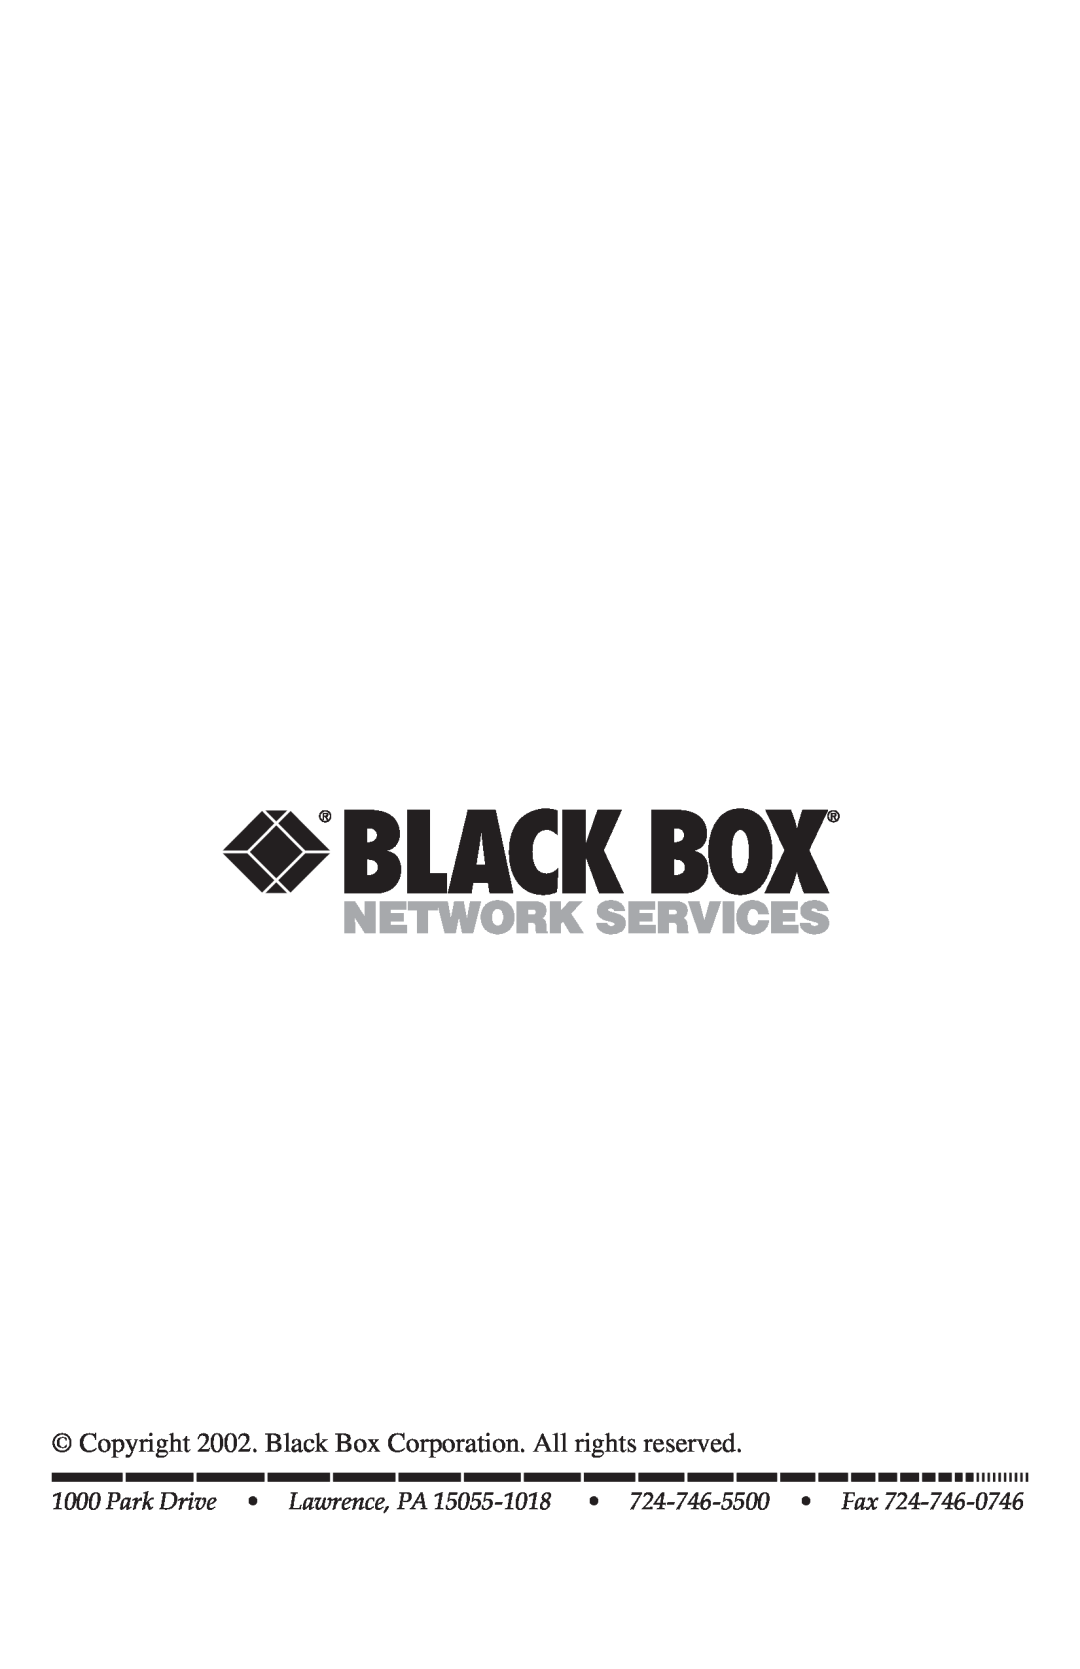 Black Box SW487A-R2 manual Copyright 2002. Black Box Corporation. All rights reserved 